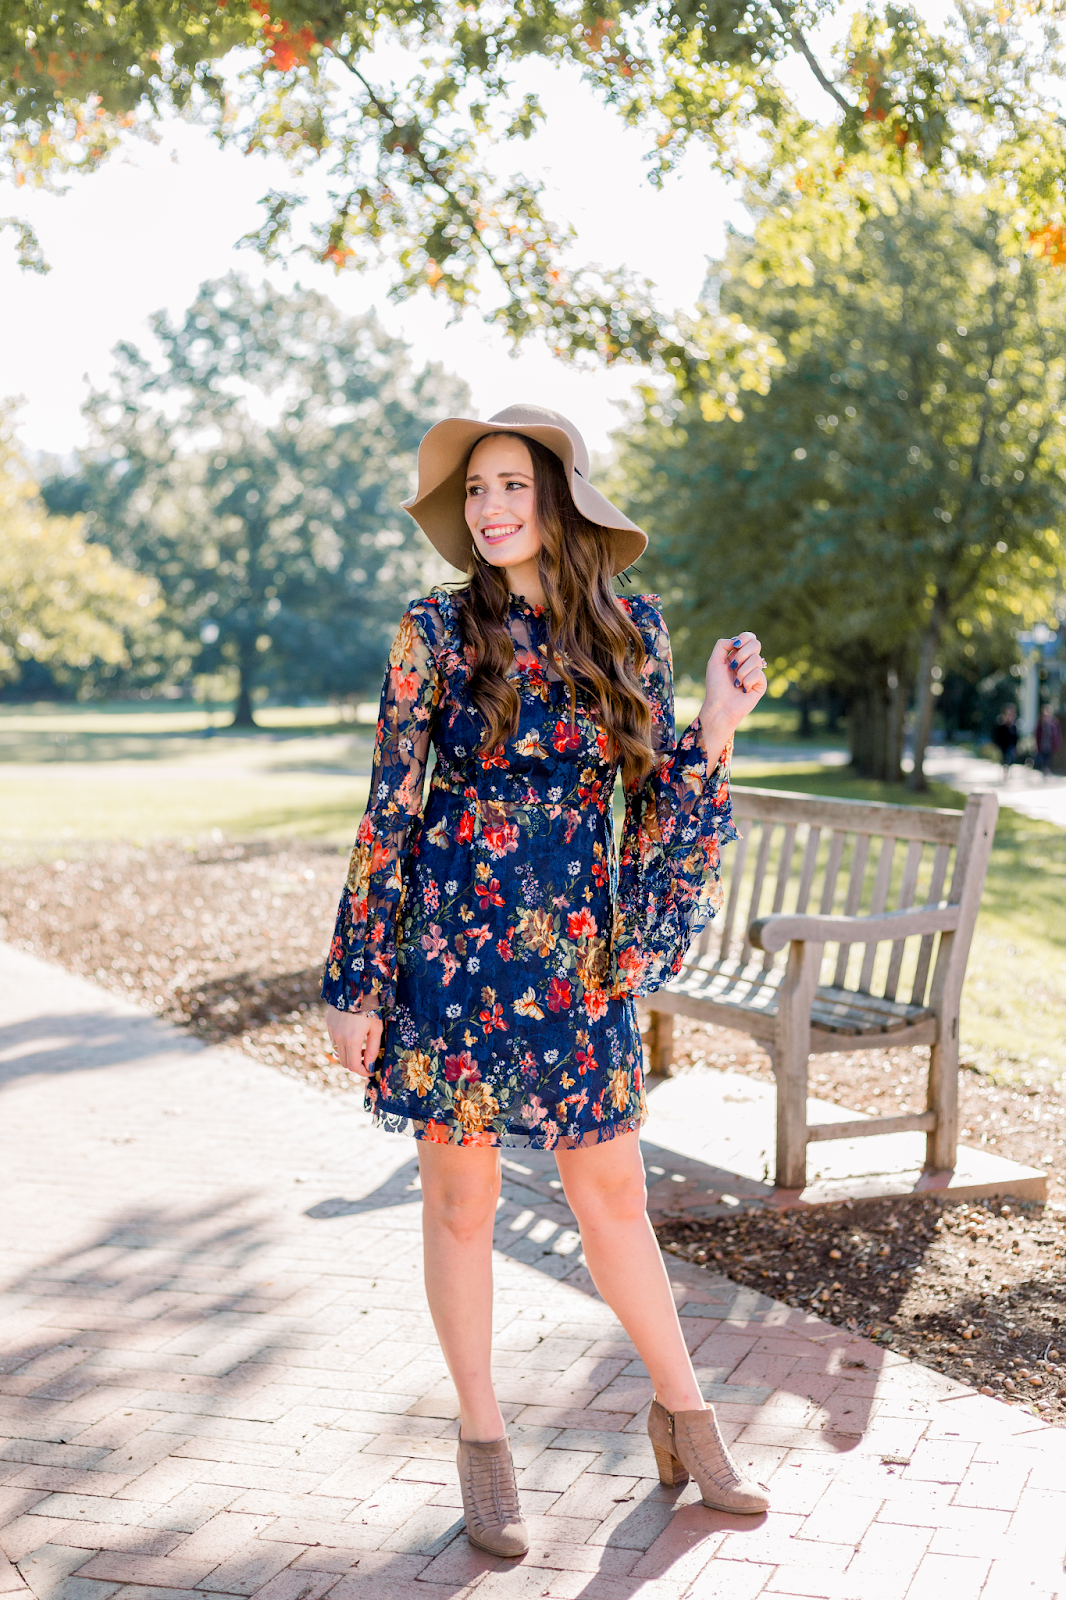 THE Dress to Pack for Thanksgiving Travels. | Southern Belle in Training